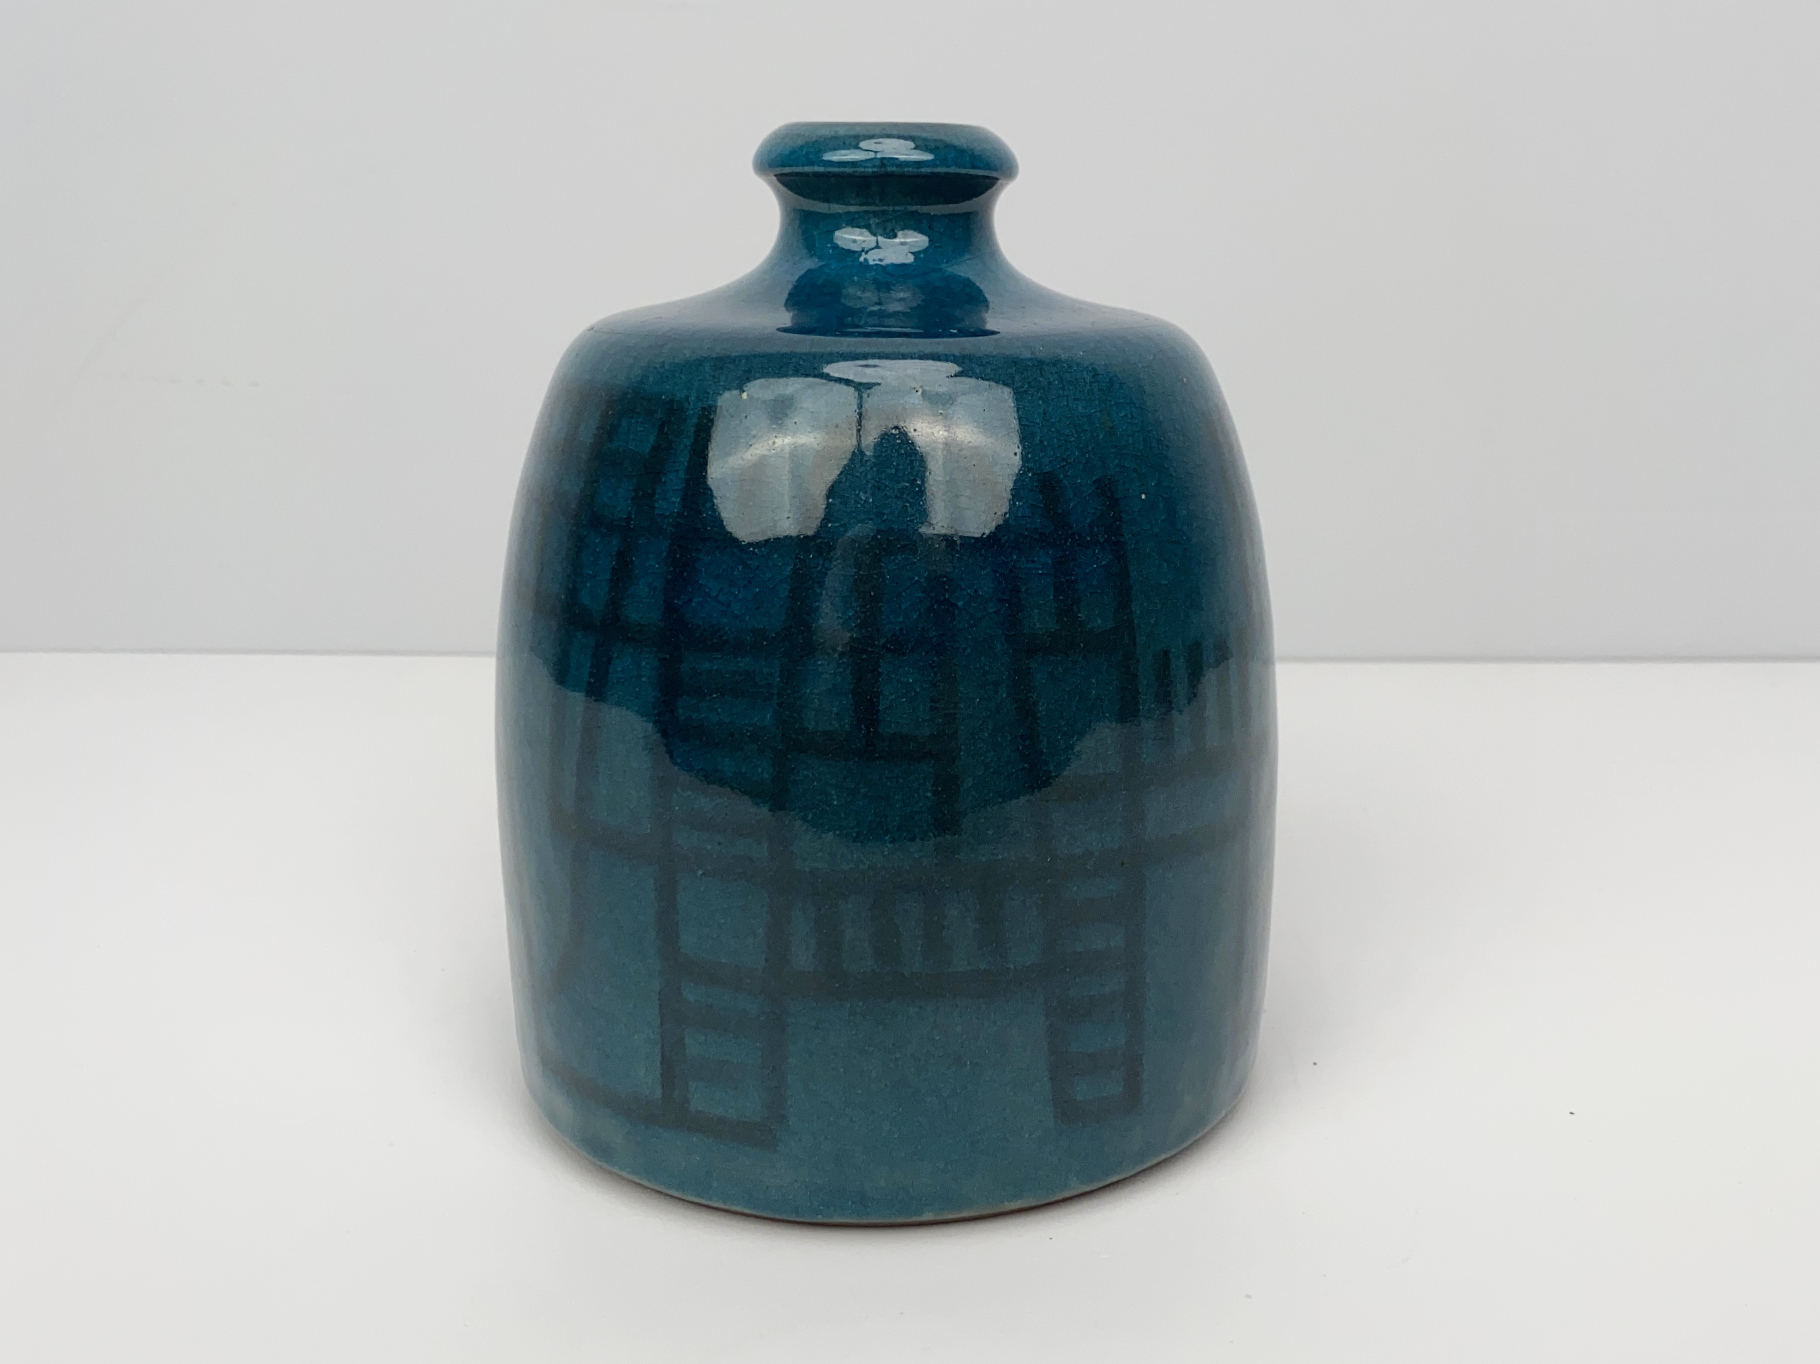 Vase, Ceramic, Earthenware, Unique Piece, glazed, painted with geometric Line Pattern, by Wilhelm & Elly Kuch, 1970s